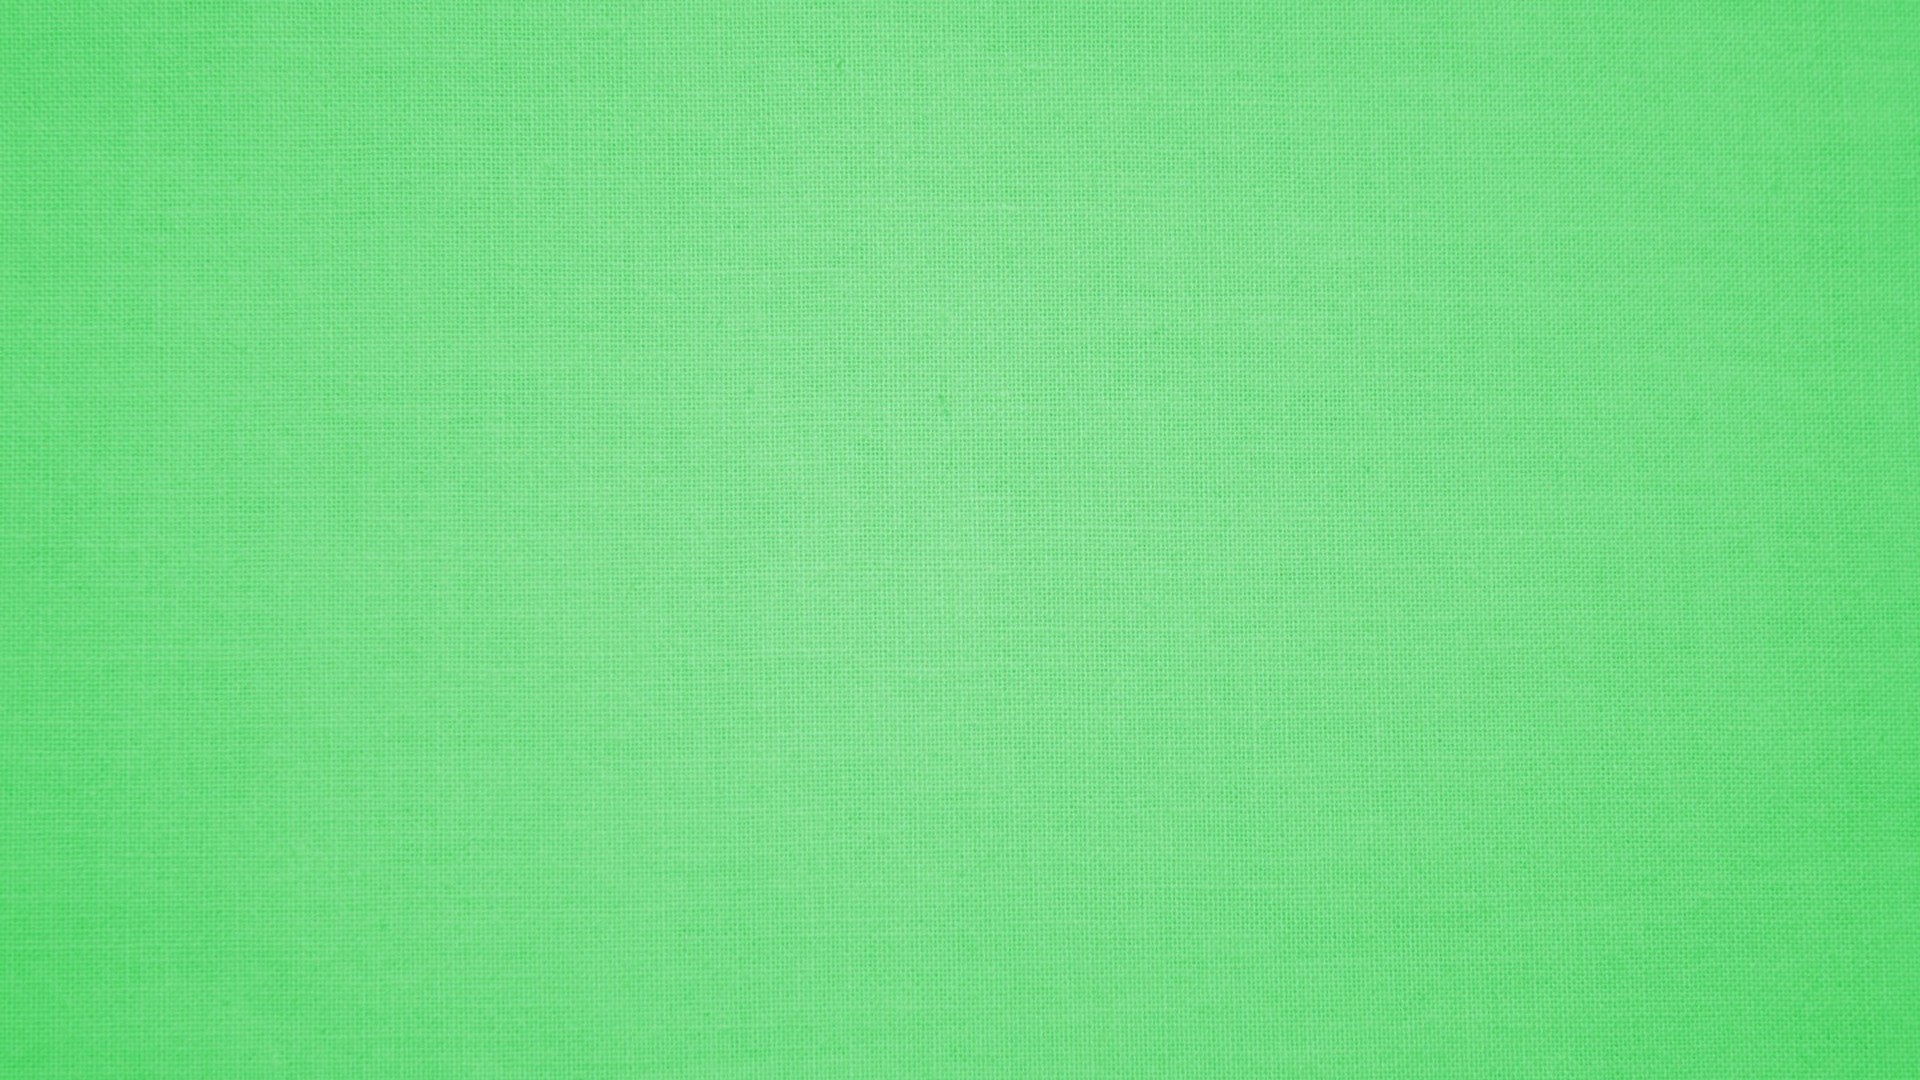 Mint Green Desktop Backgrounds HD with resolution 1920X1080 pixel. You can use this wallpaper as background for your desktop Computer Screensavers, Android or iPhone smartphones